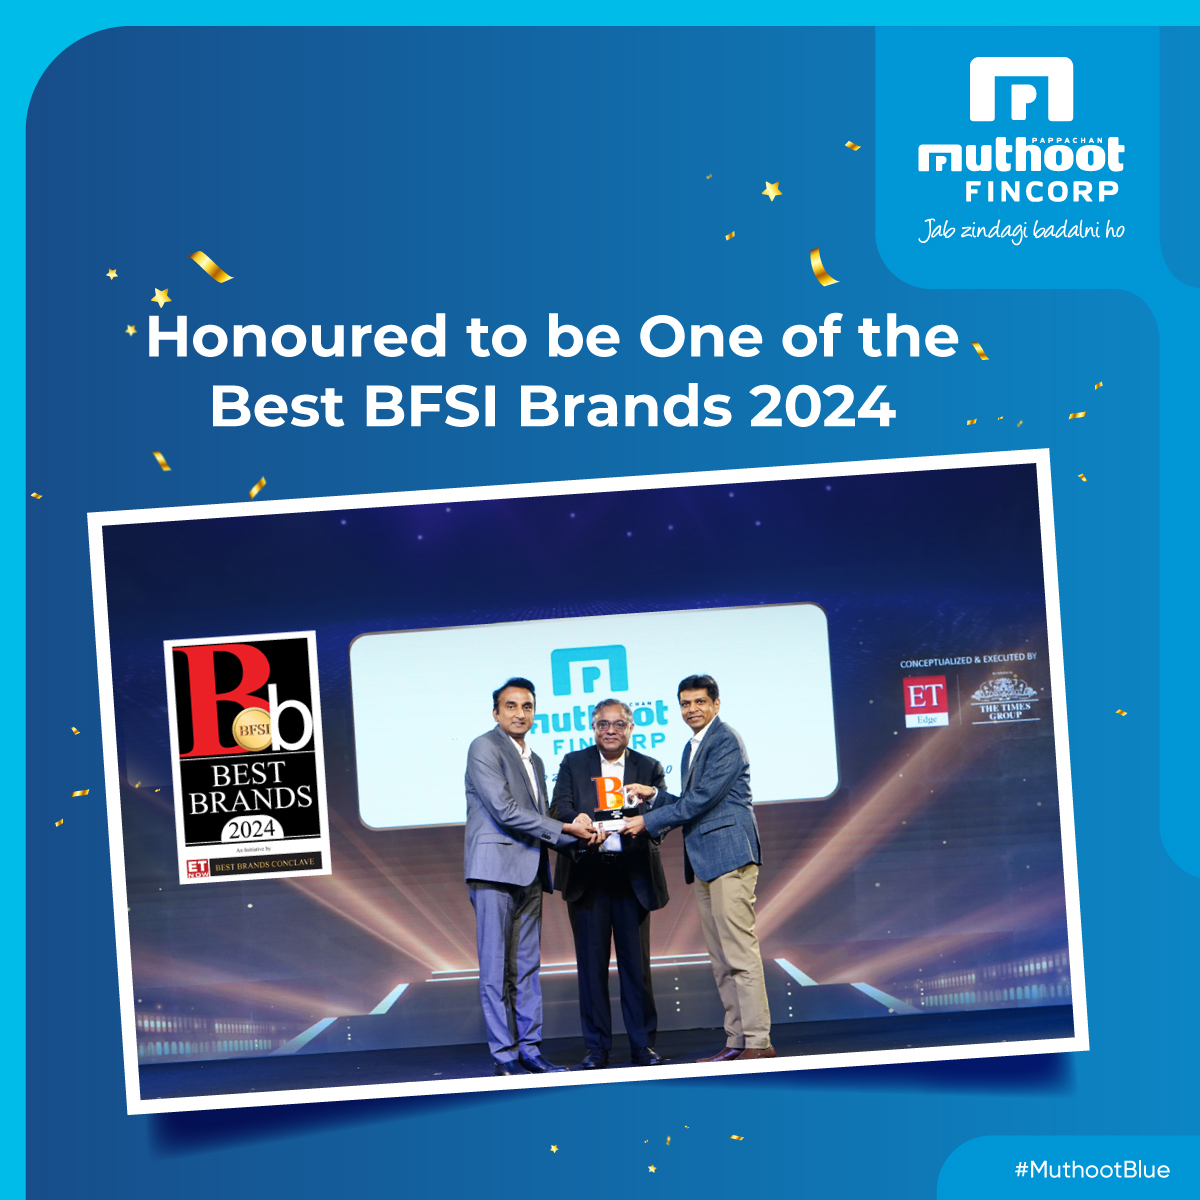 It gives us immense pride and happiness to be recognized as one of the Best BFSI Brands at the 7th edition of the “ET Now Best BFSI Brands 2024,” organized by The Economic Times Edge. 

#MuthootFinCorp #BlueSoch #MuthootBlue #MuthootPappachanGroup #MuthootFinCorpONE